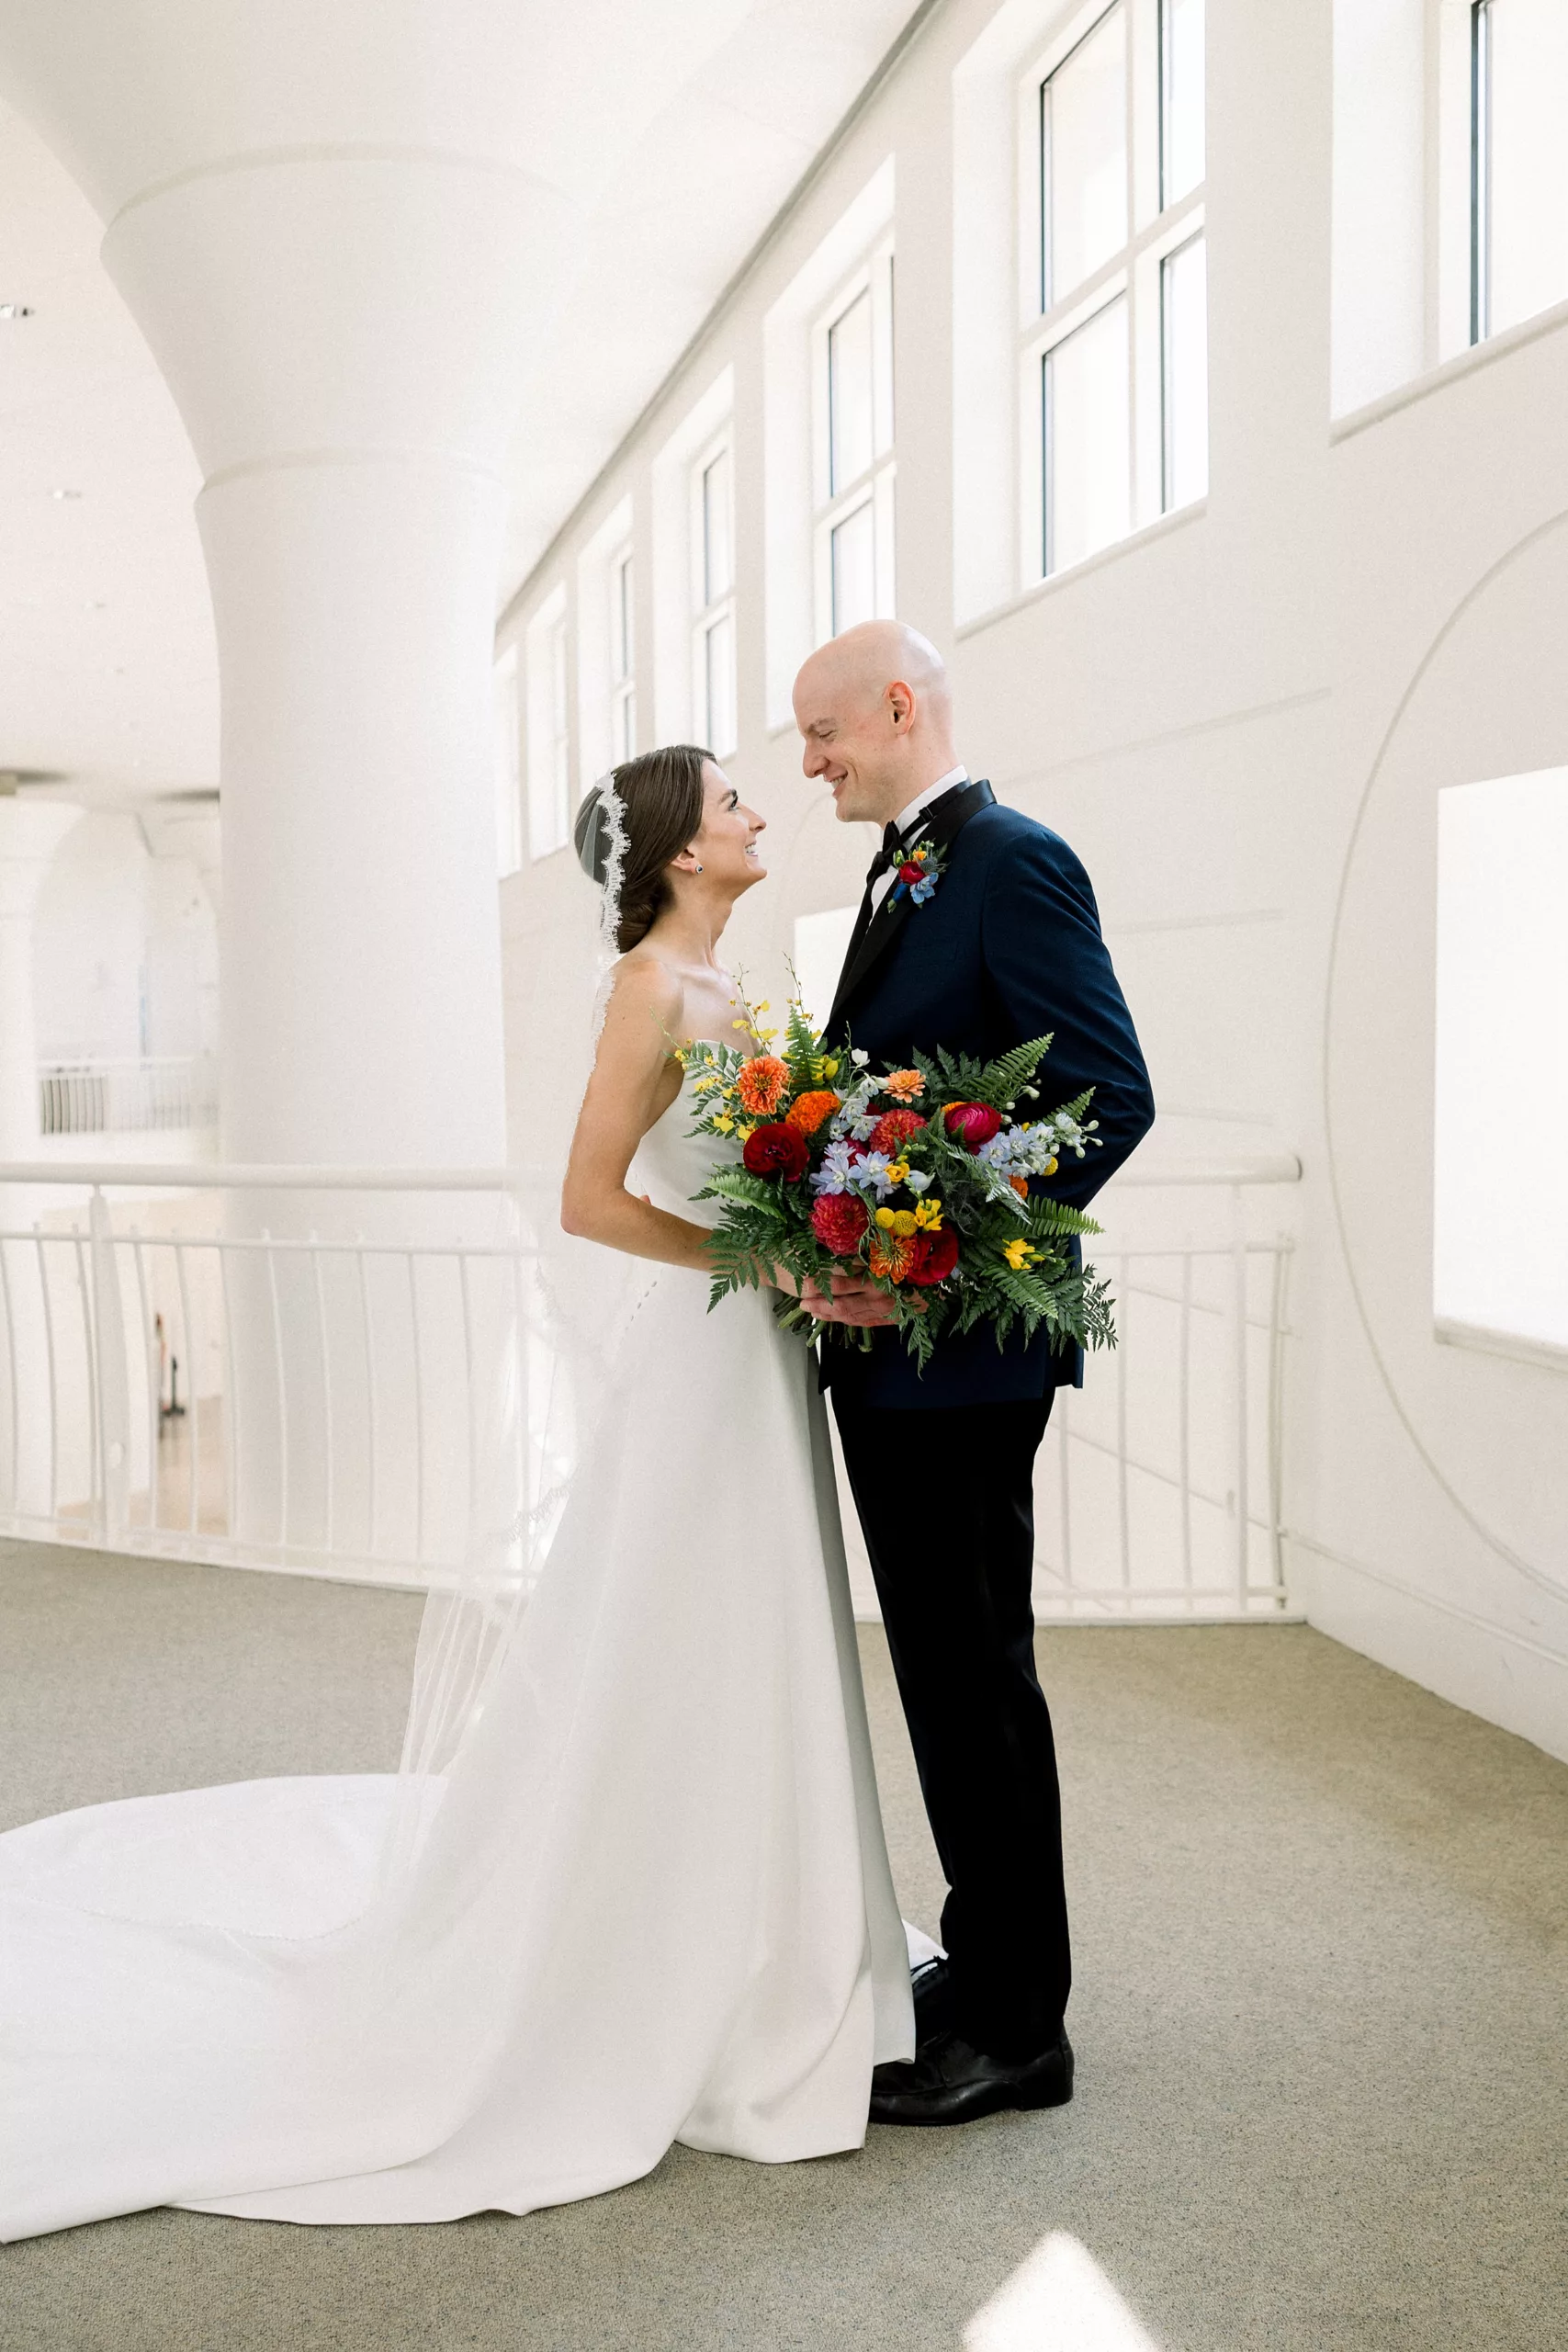 A bride and groom lean in for a kiss while standing in a large white balcony indoors during their first look wedding